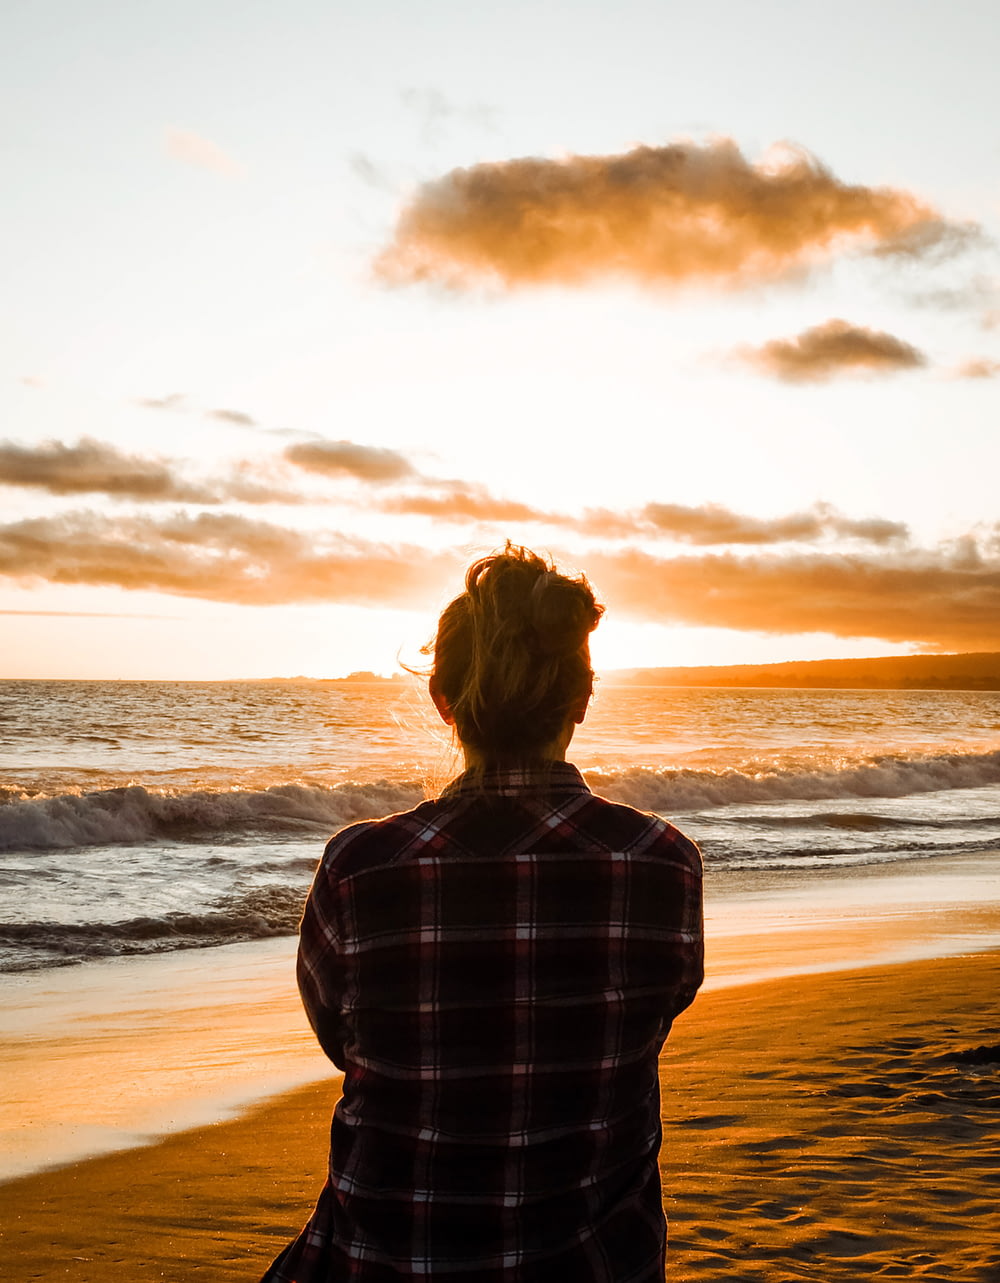 woman in black and white plaid dress shirt standing on seashore during sunset